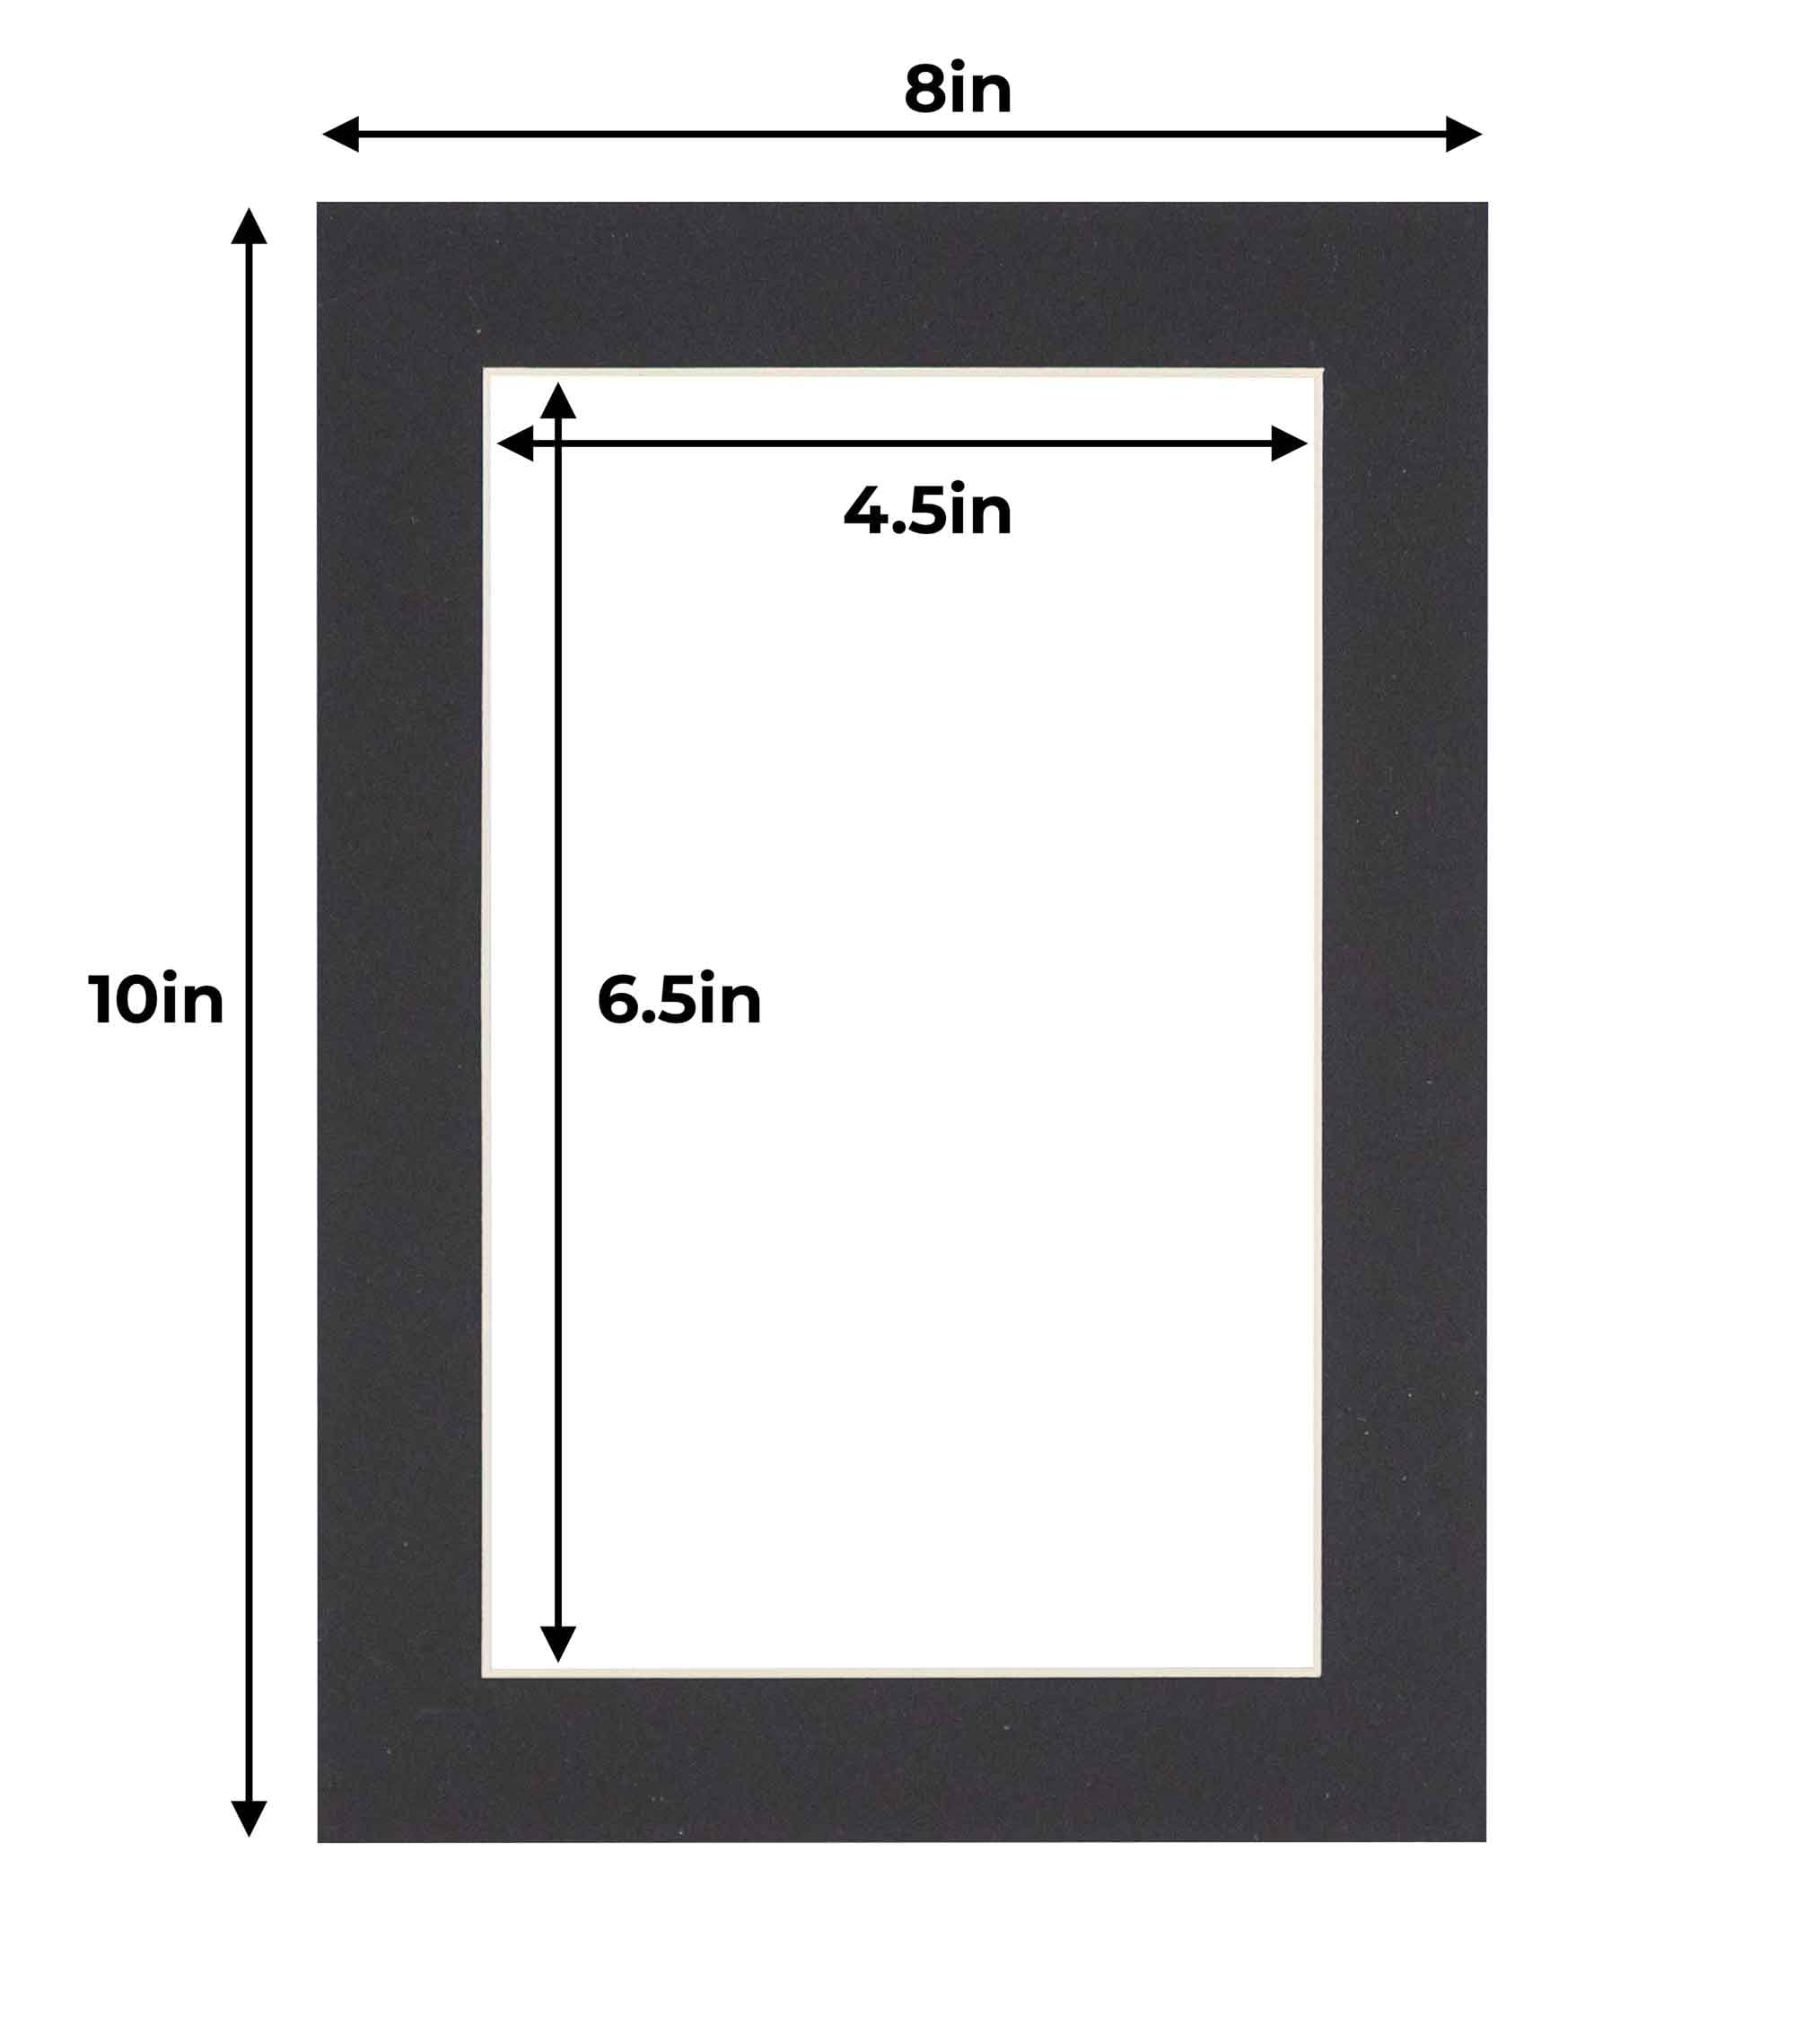 Smooth White 8x10 White Picture Mats with White Core for 5x7